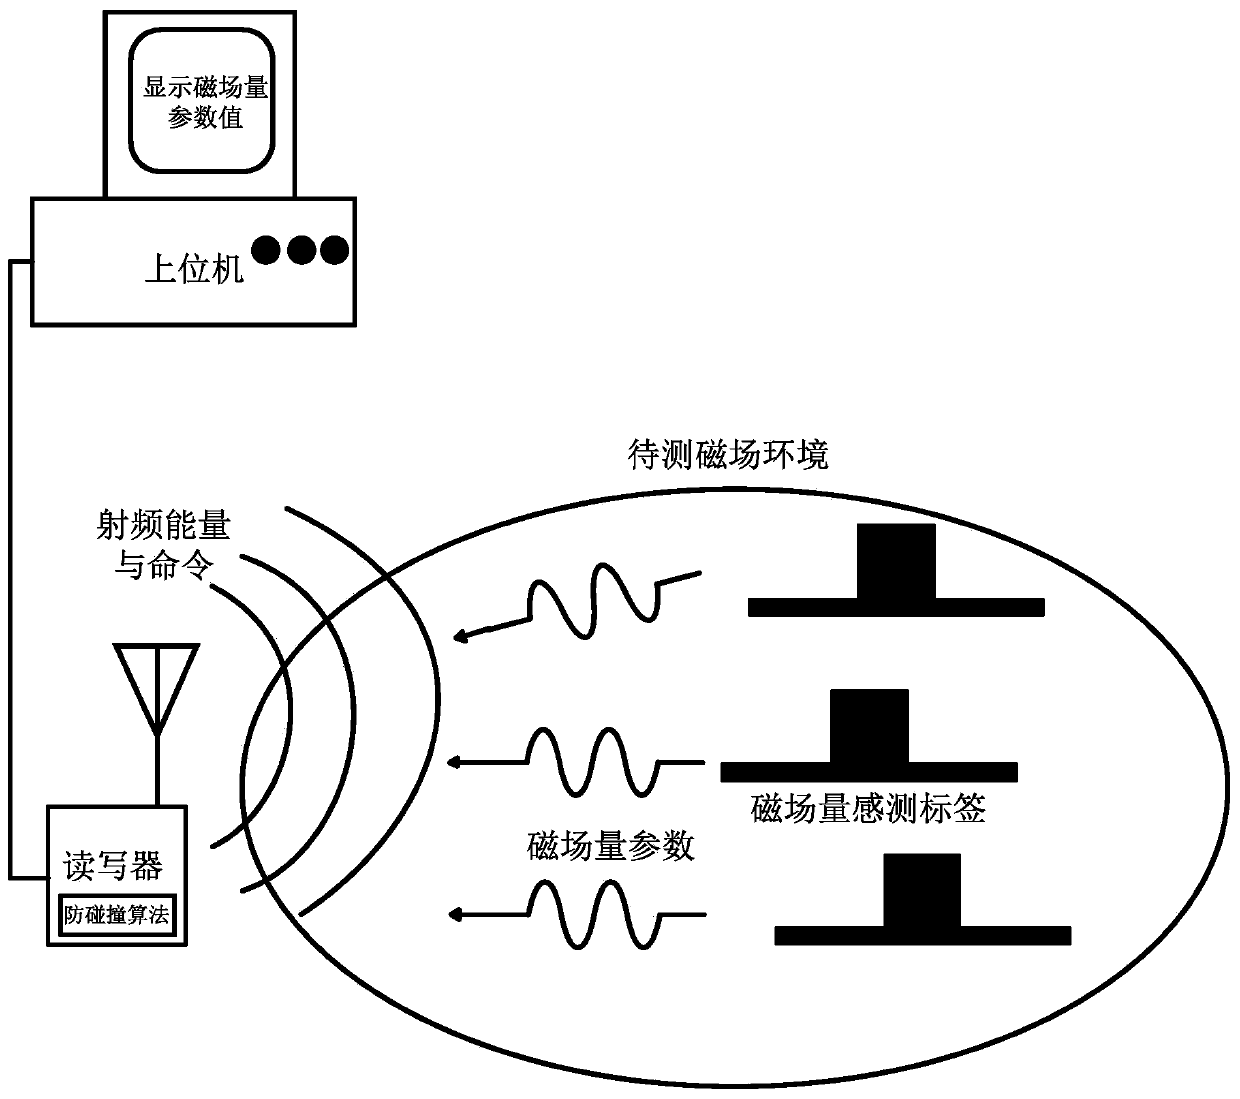 Long-distance passive wireless magnetic field quantity sensing system